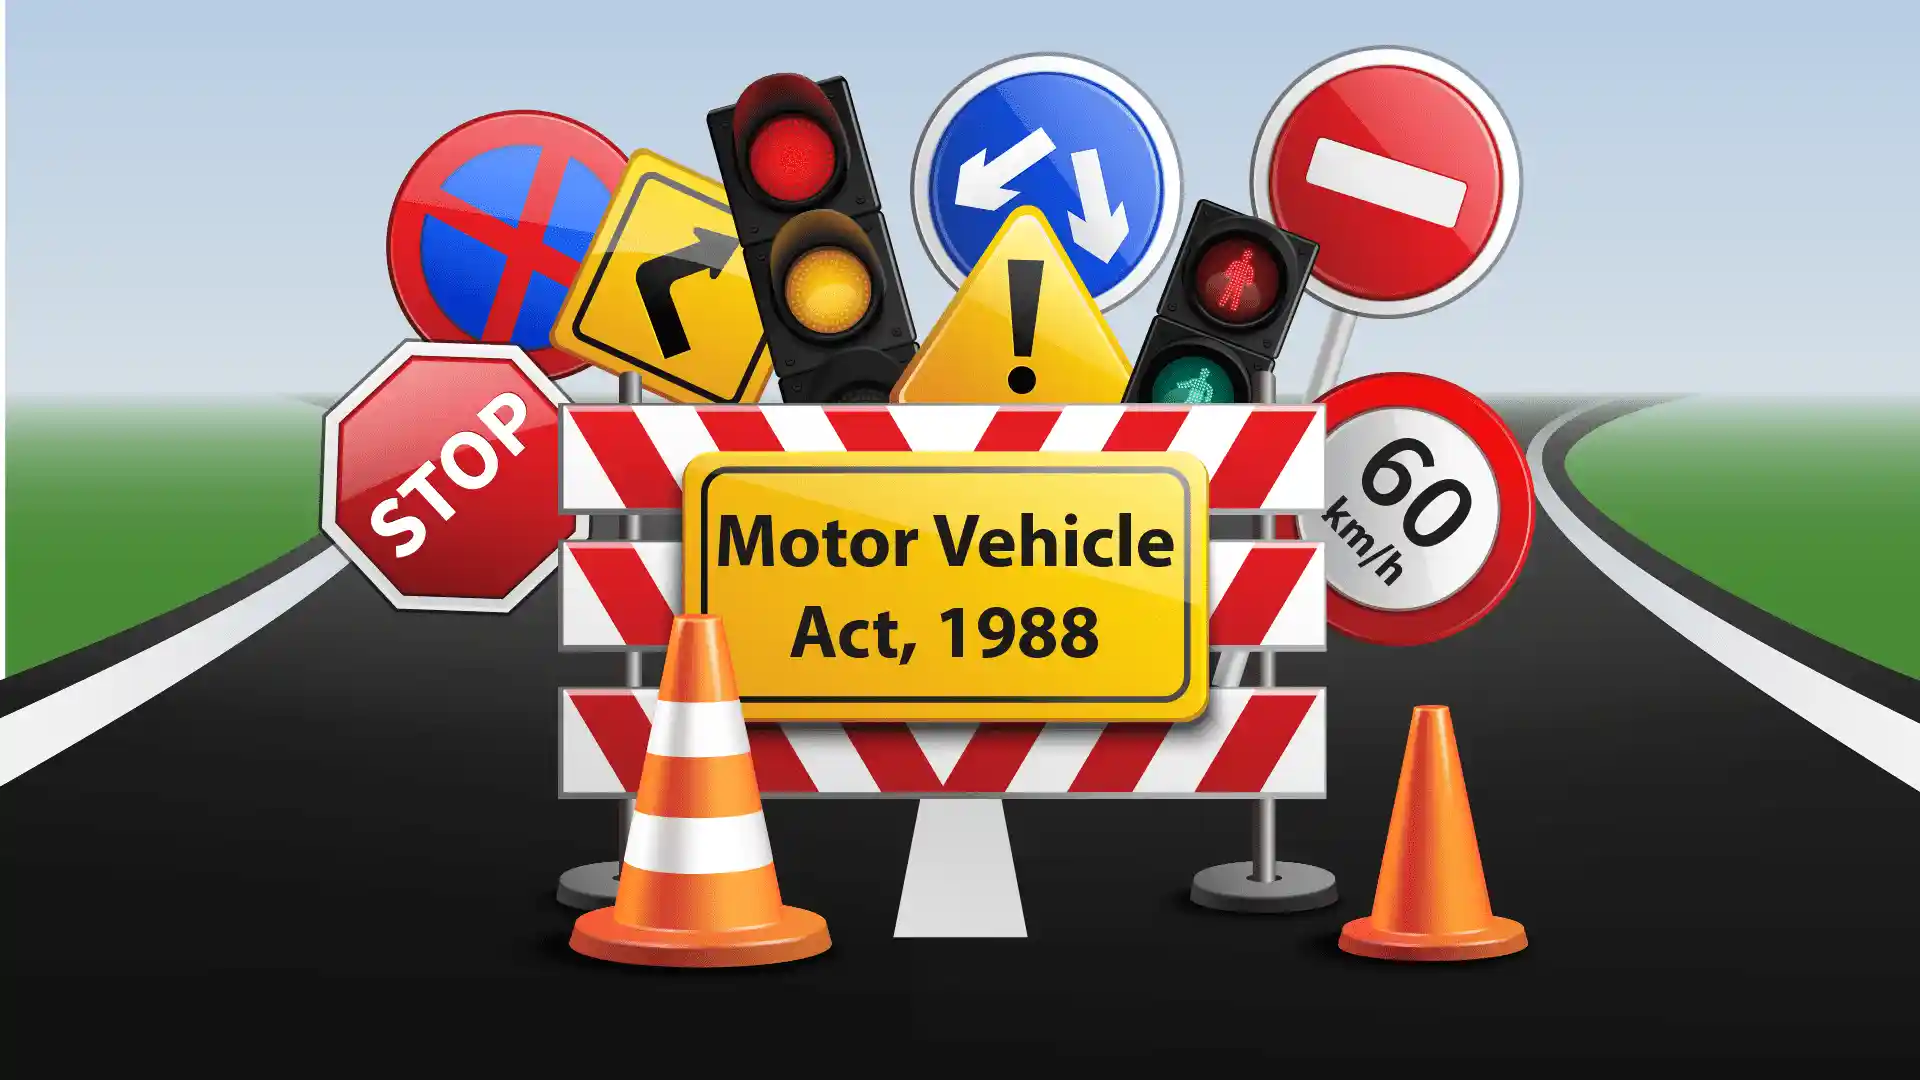 In this image there are many sign of the Motor vehicles act ,1988